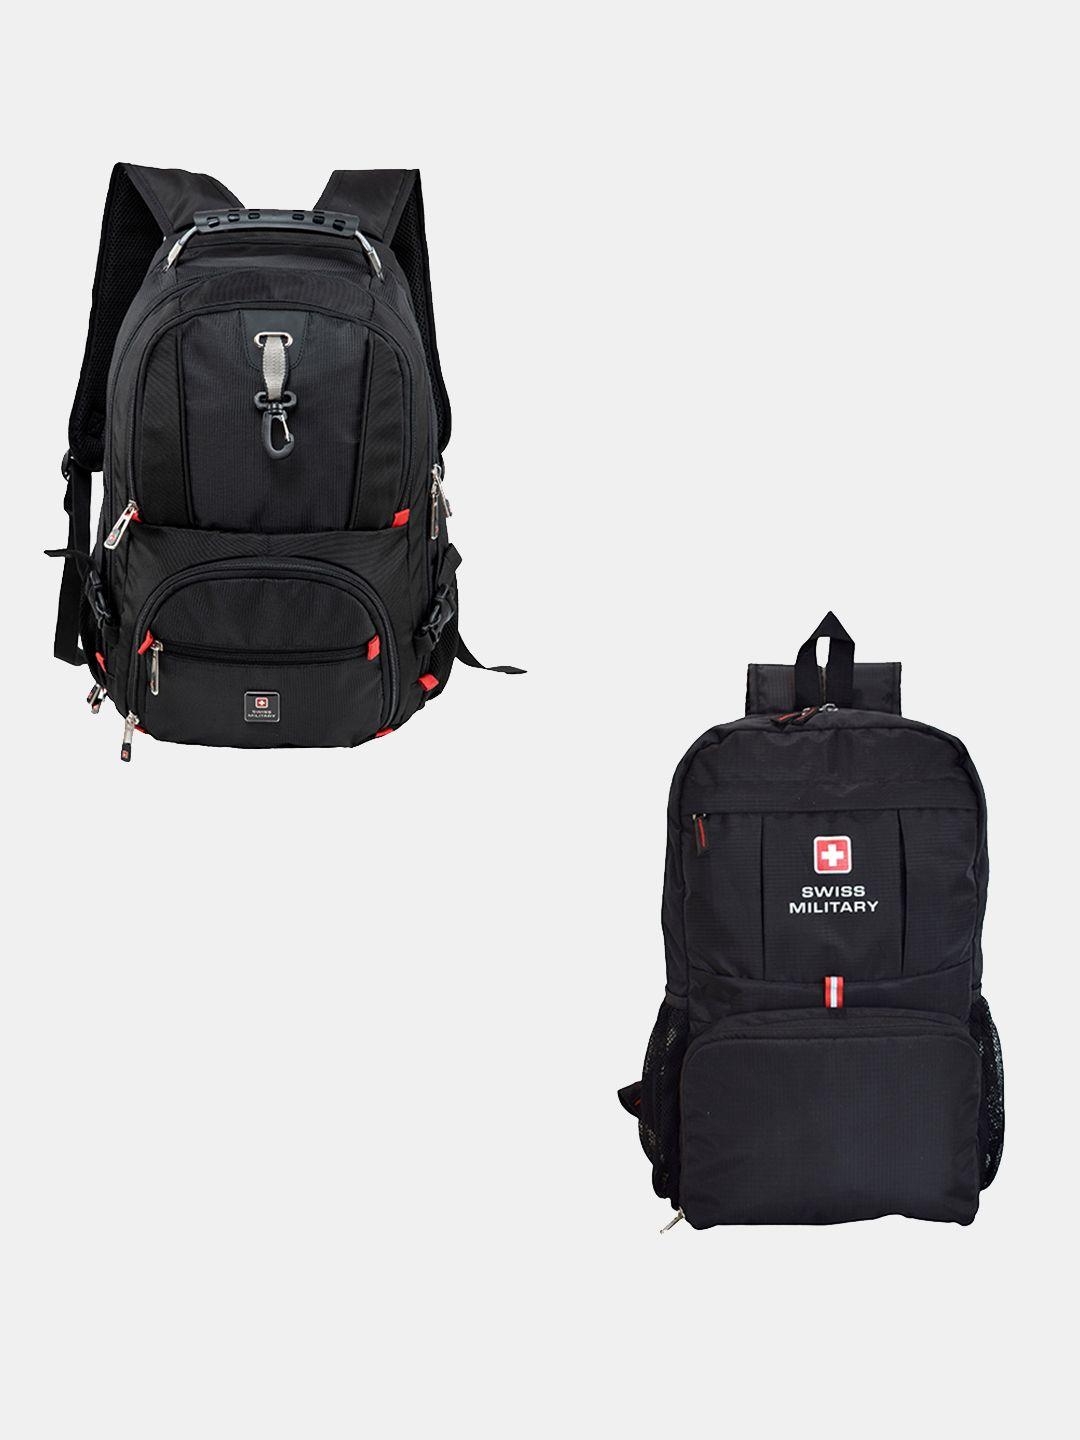 swiss military brand logo backpack and foldable sports bag